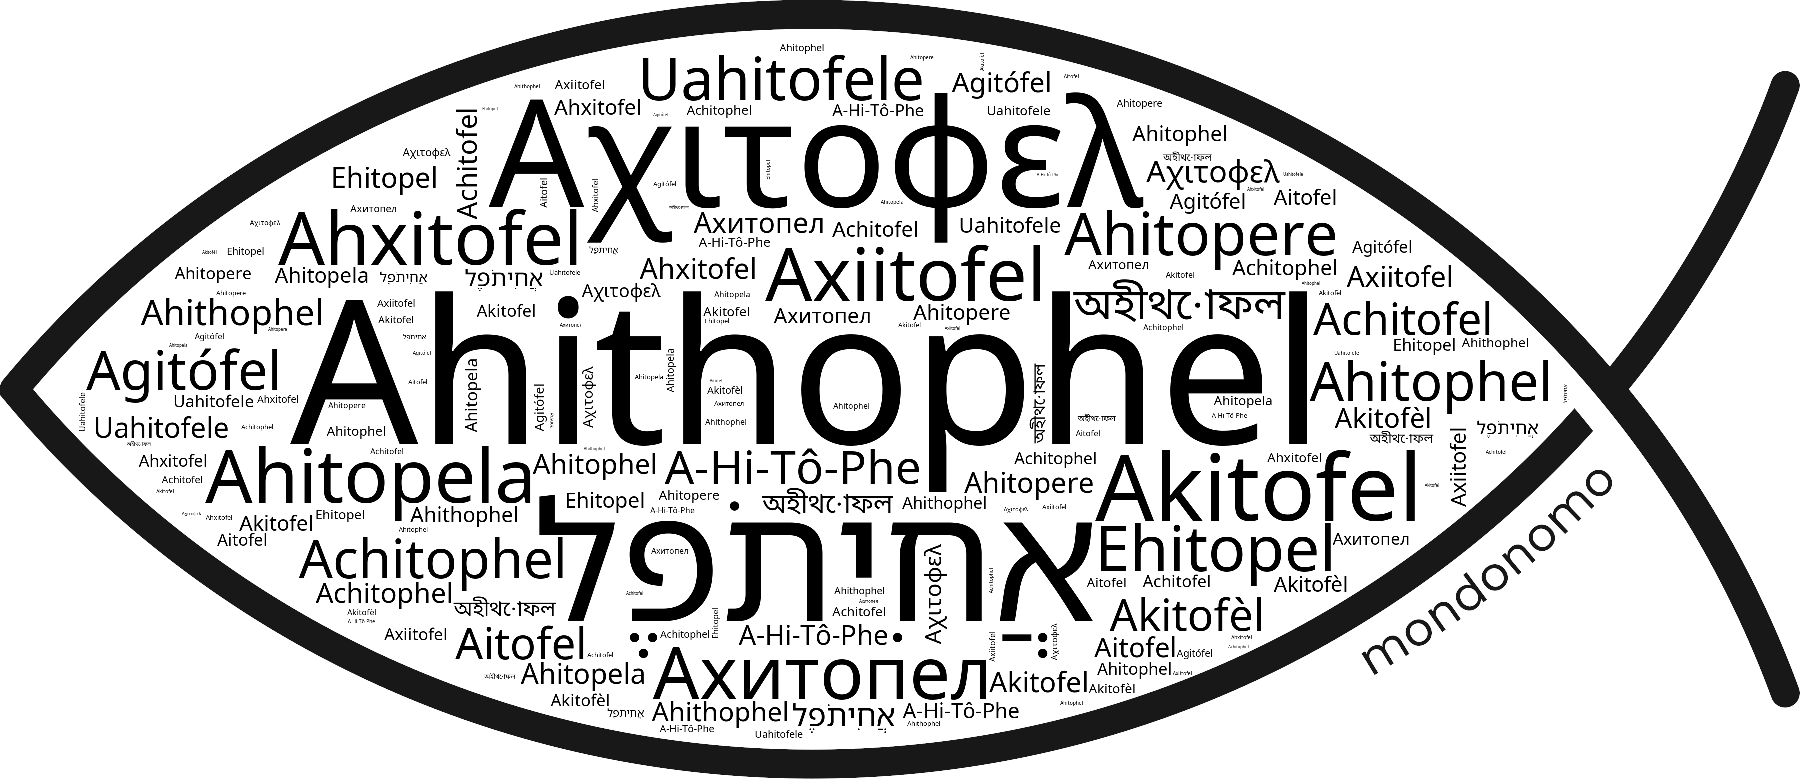 Name Ahithophel in the world's Bibles